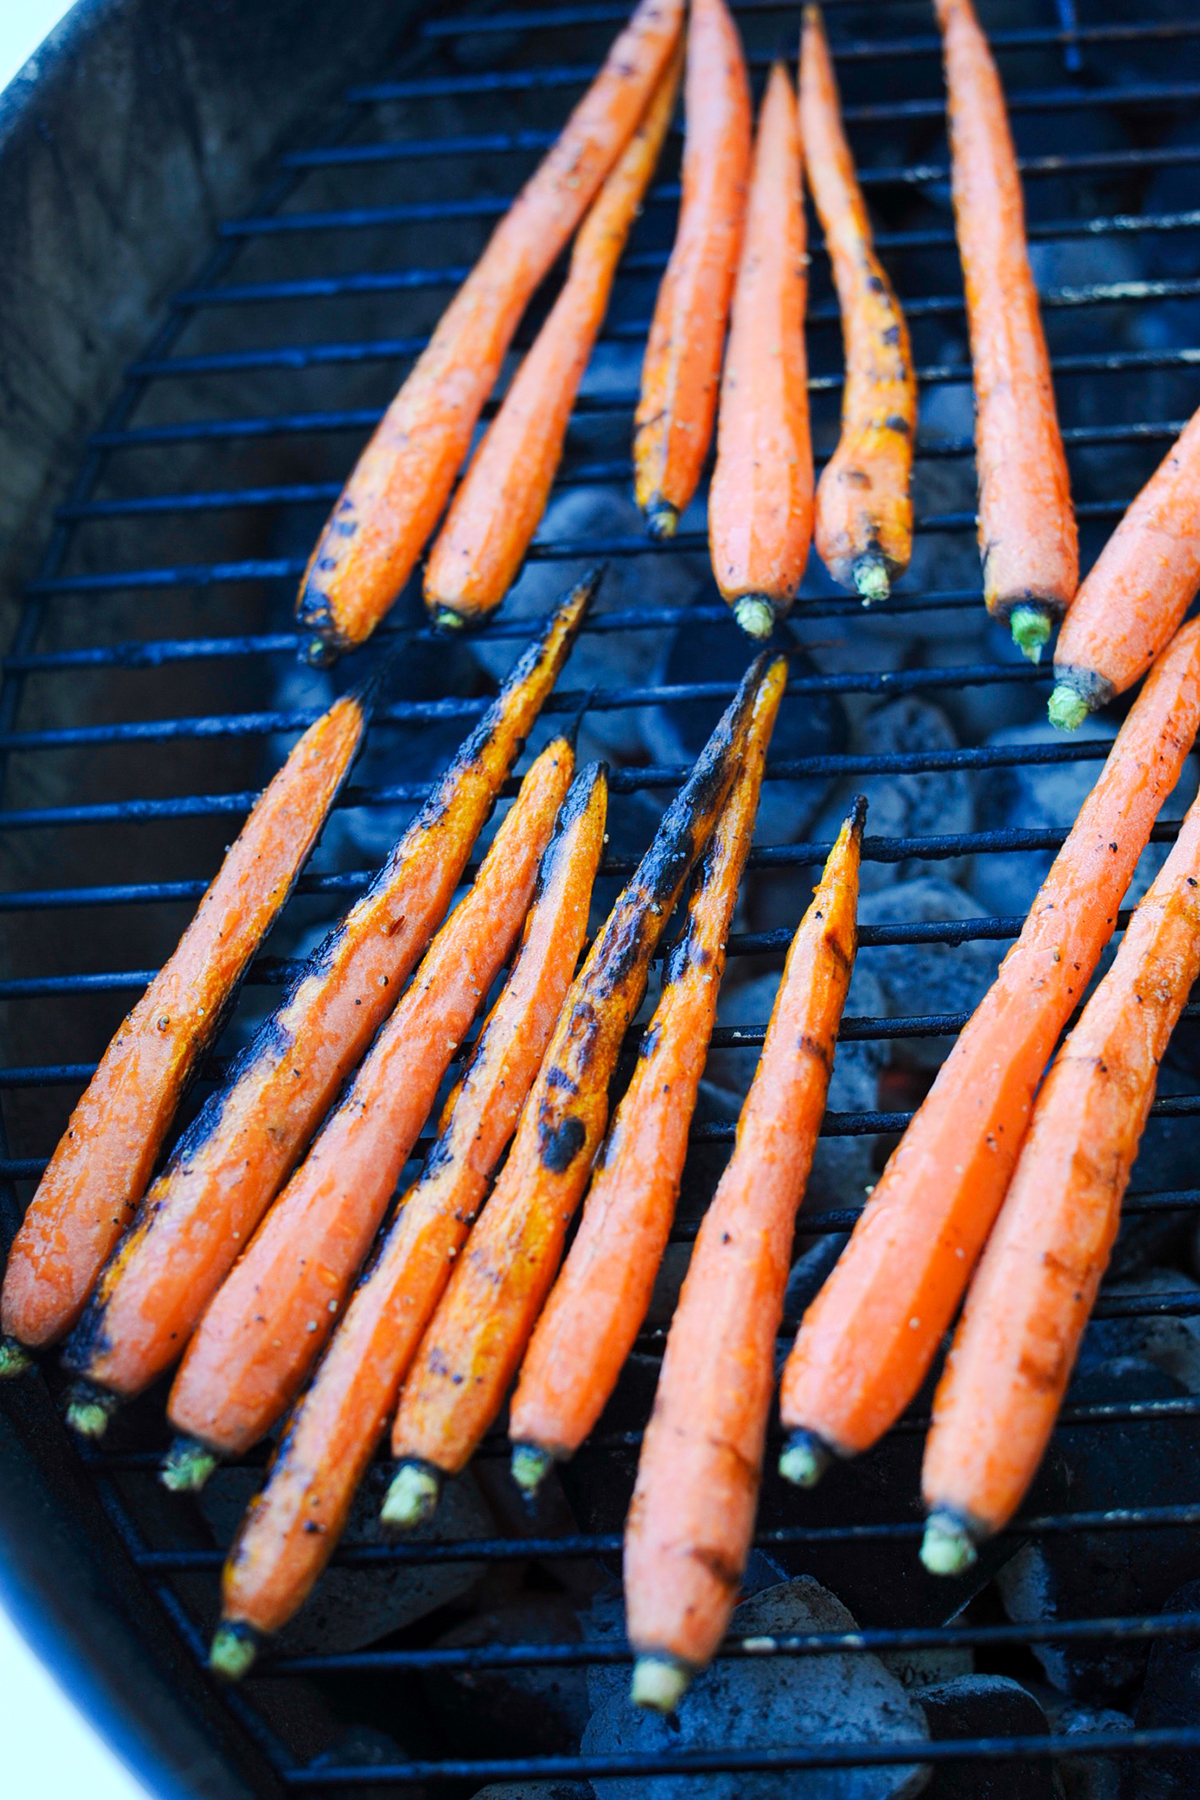 Carrots charred on grill.